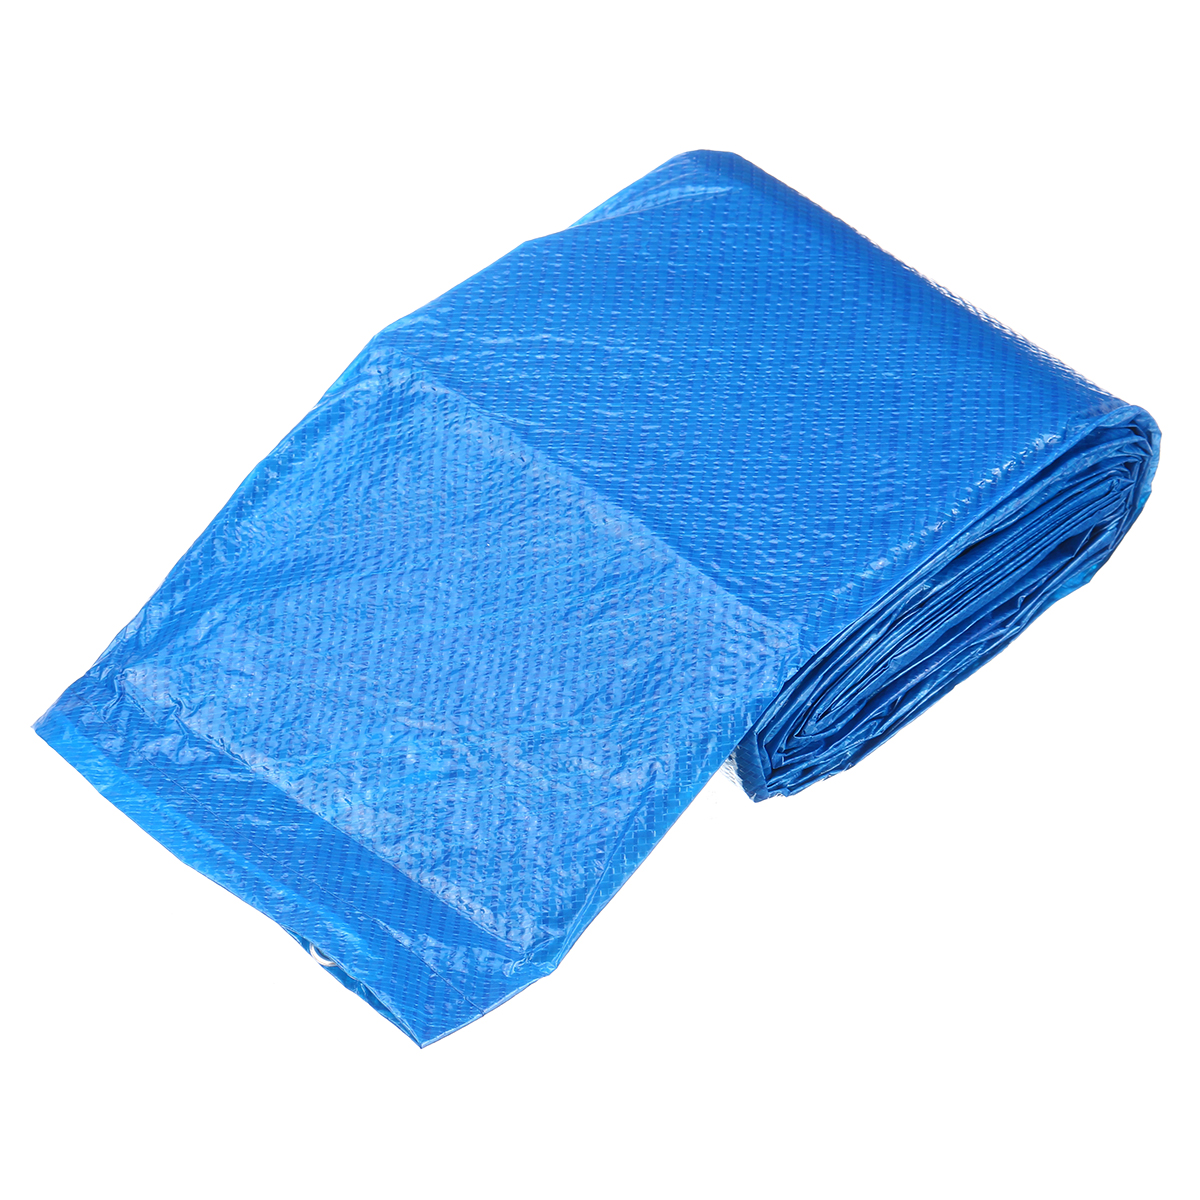 244305366cm-Round-Inflatable-Paddling-Swimming-Pool-Dust-Cover-Tarp-Rope-1712508-6